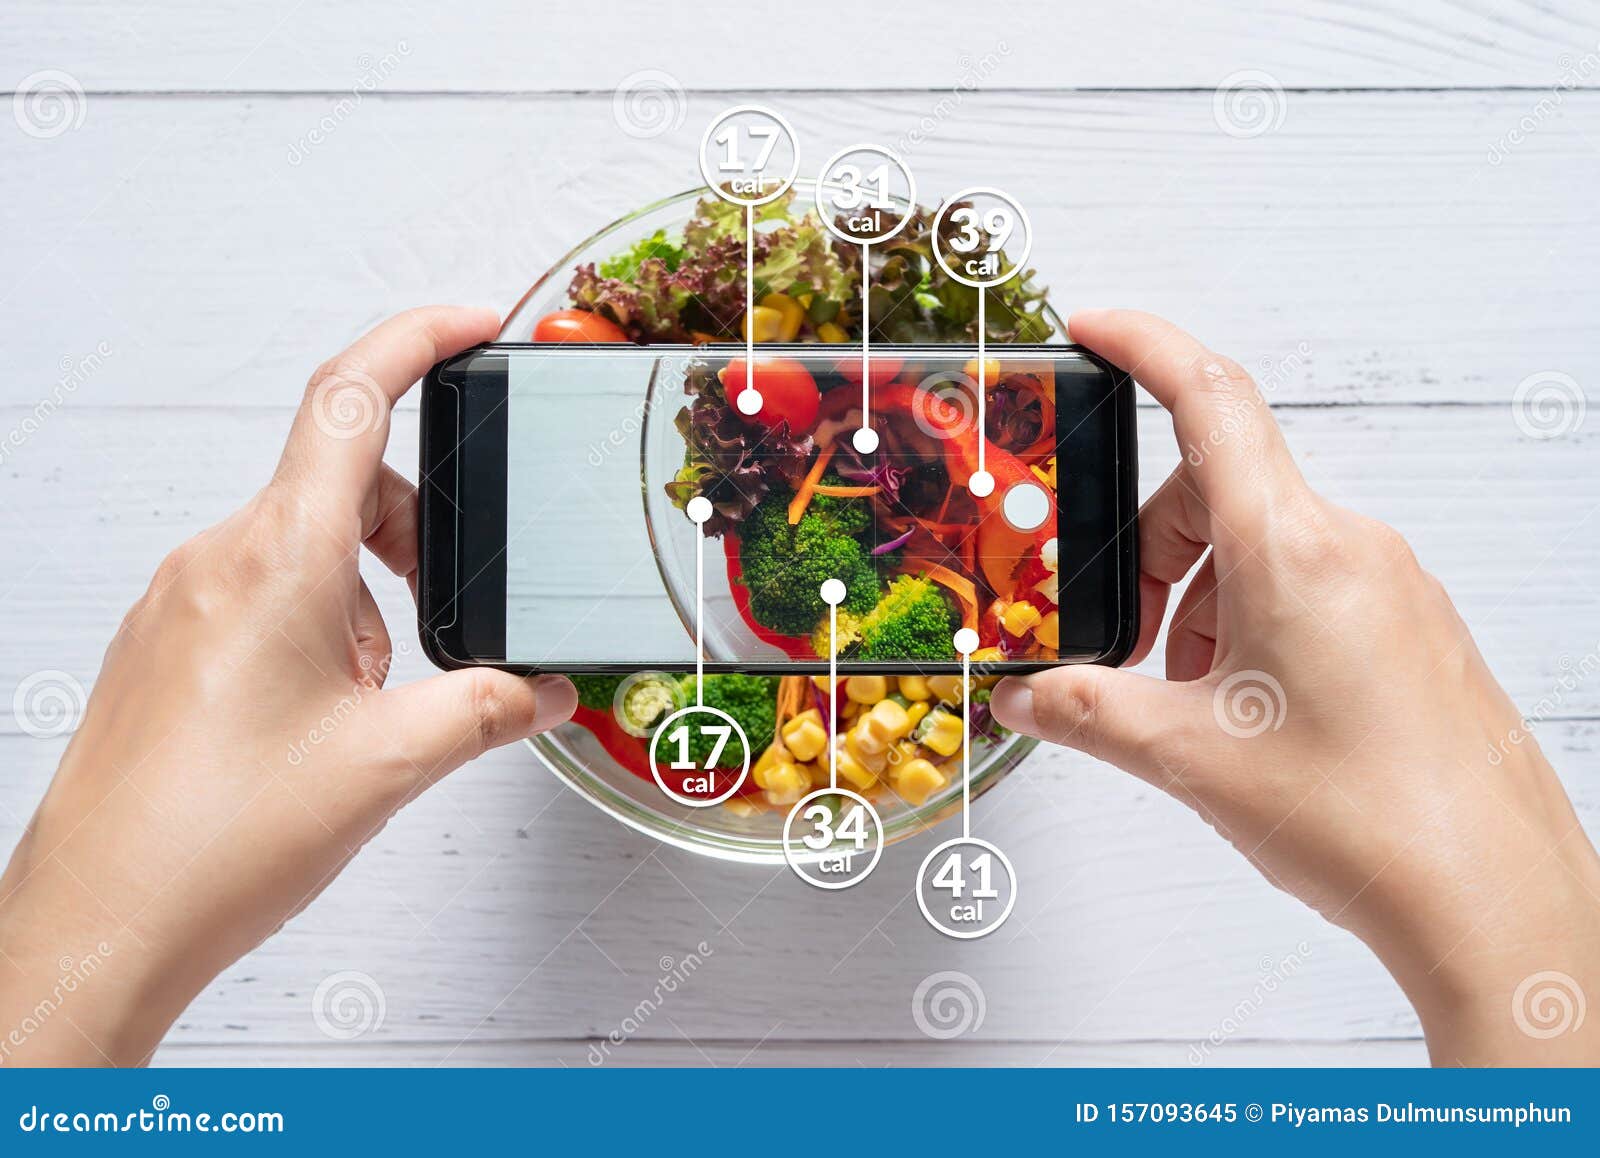 calories counting and food control concept. woman using application on smartphone for scanning the amount of calories in the food